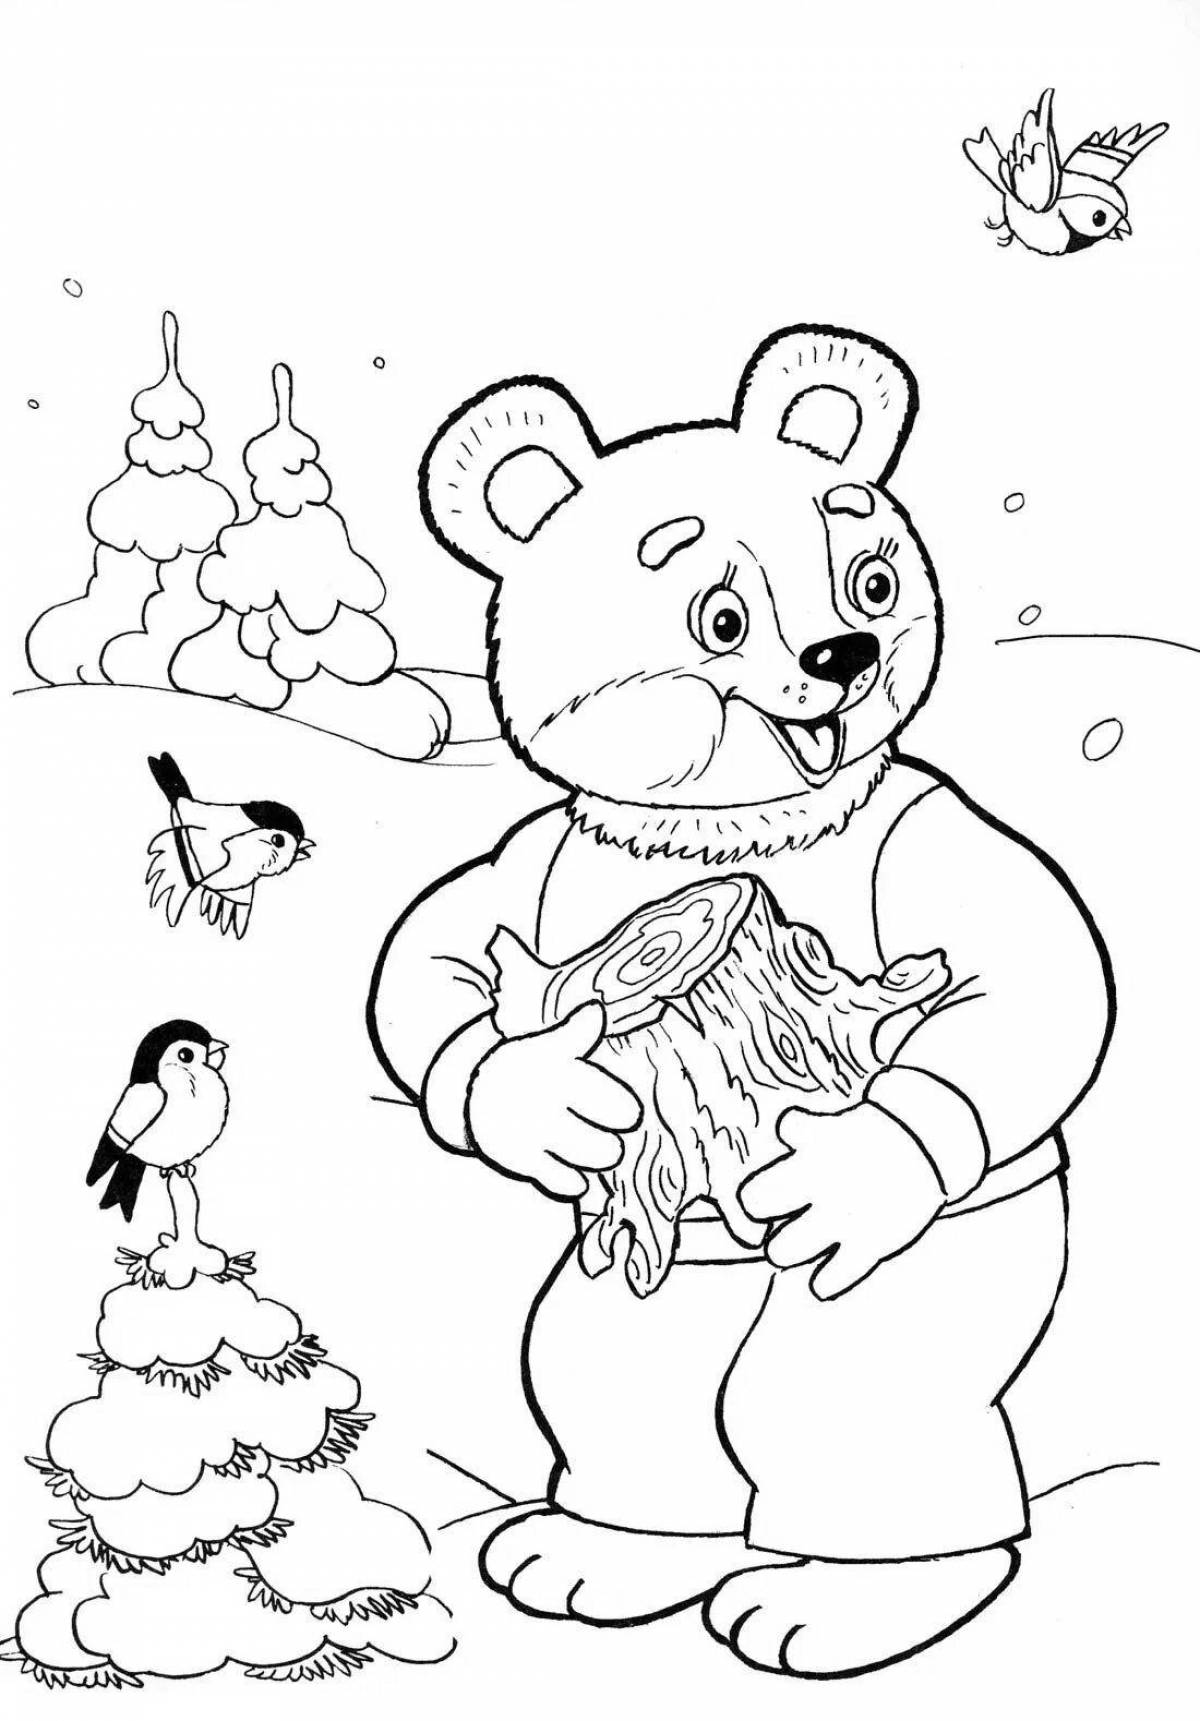 Snuggly winter coloring bear